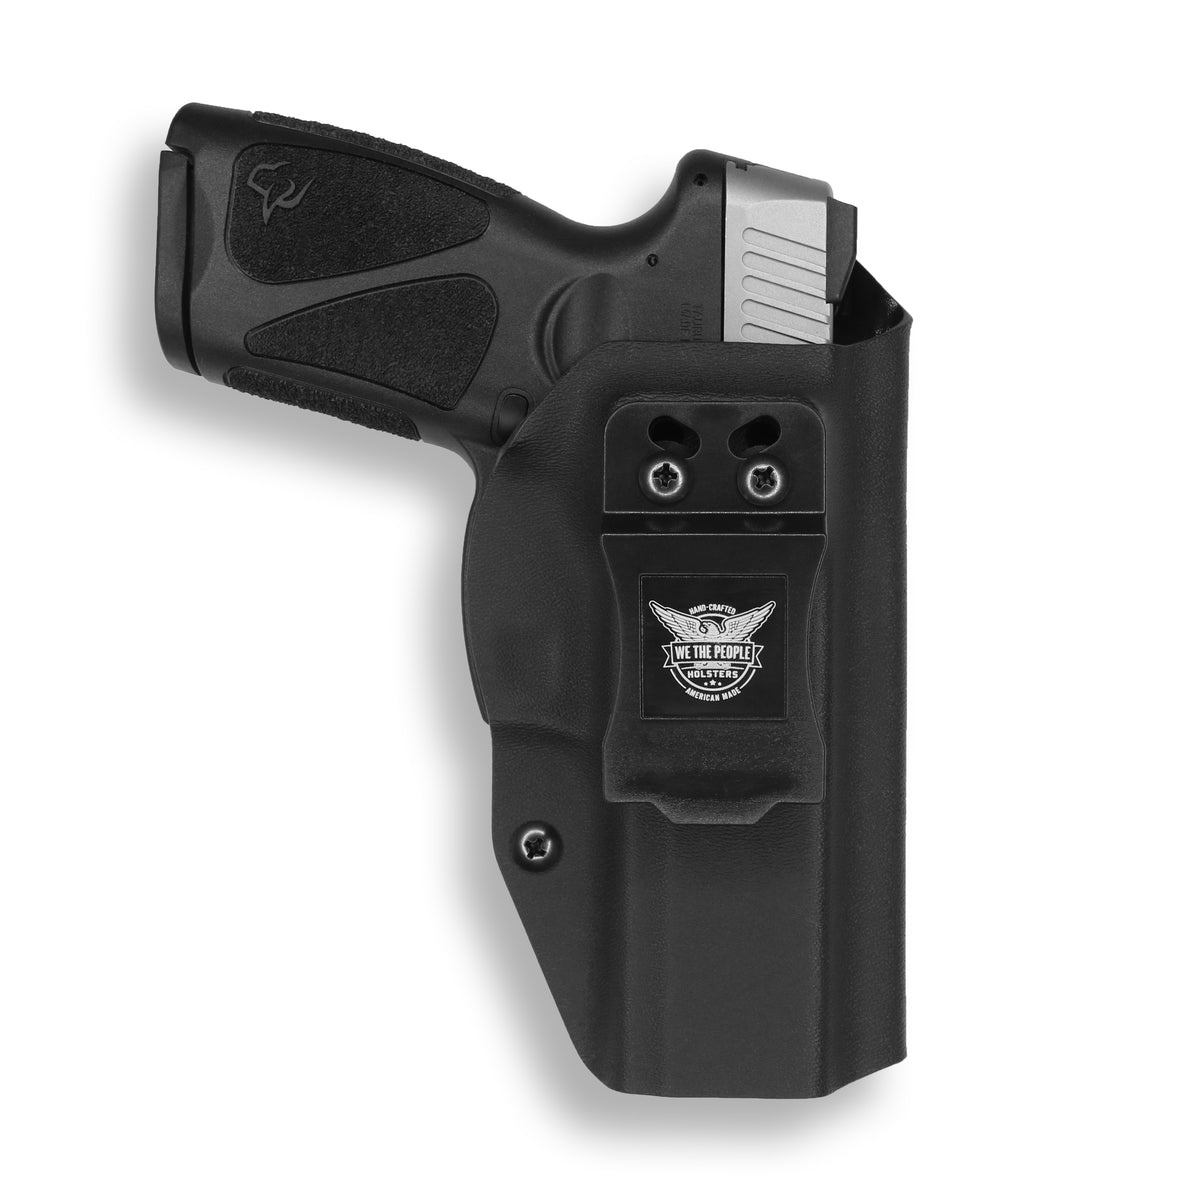 Concealment Holster For Taurus Inside the Wasitband 